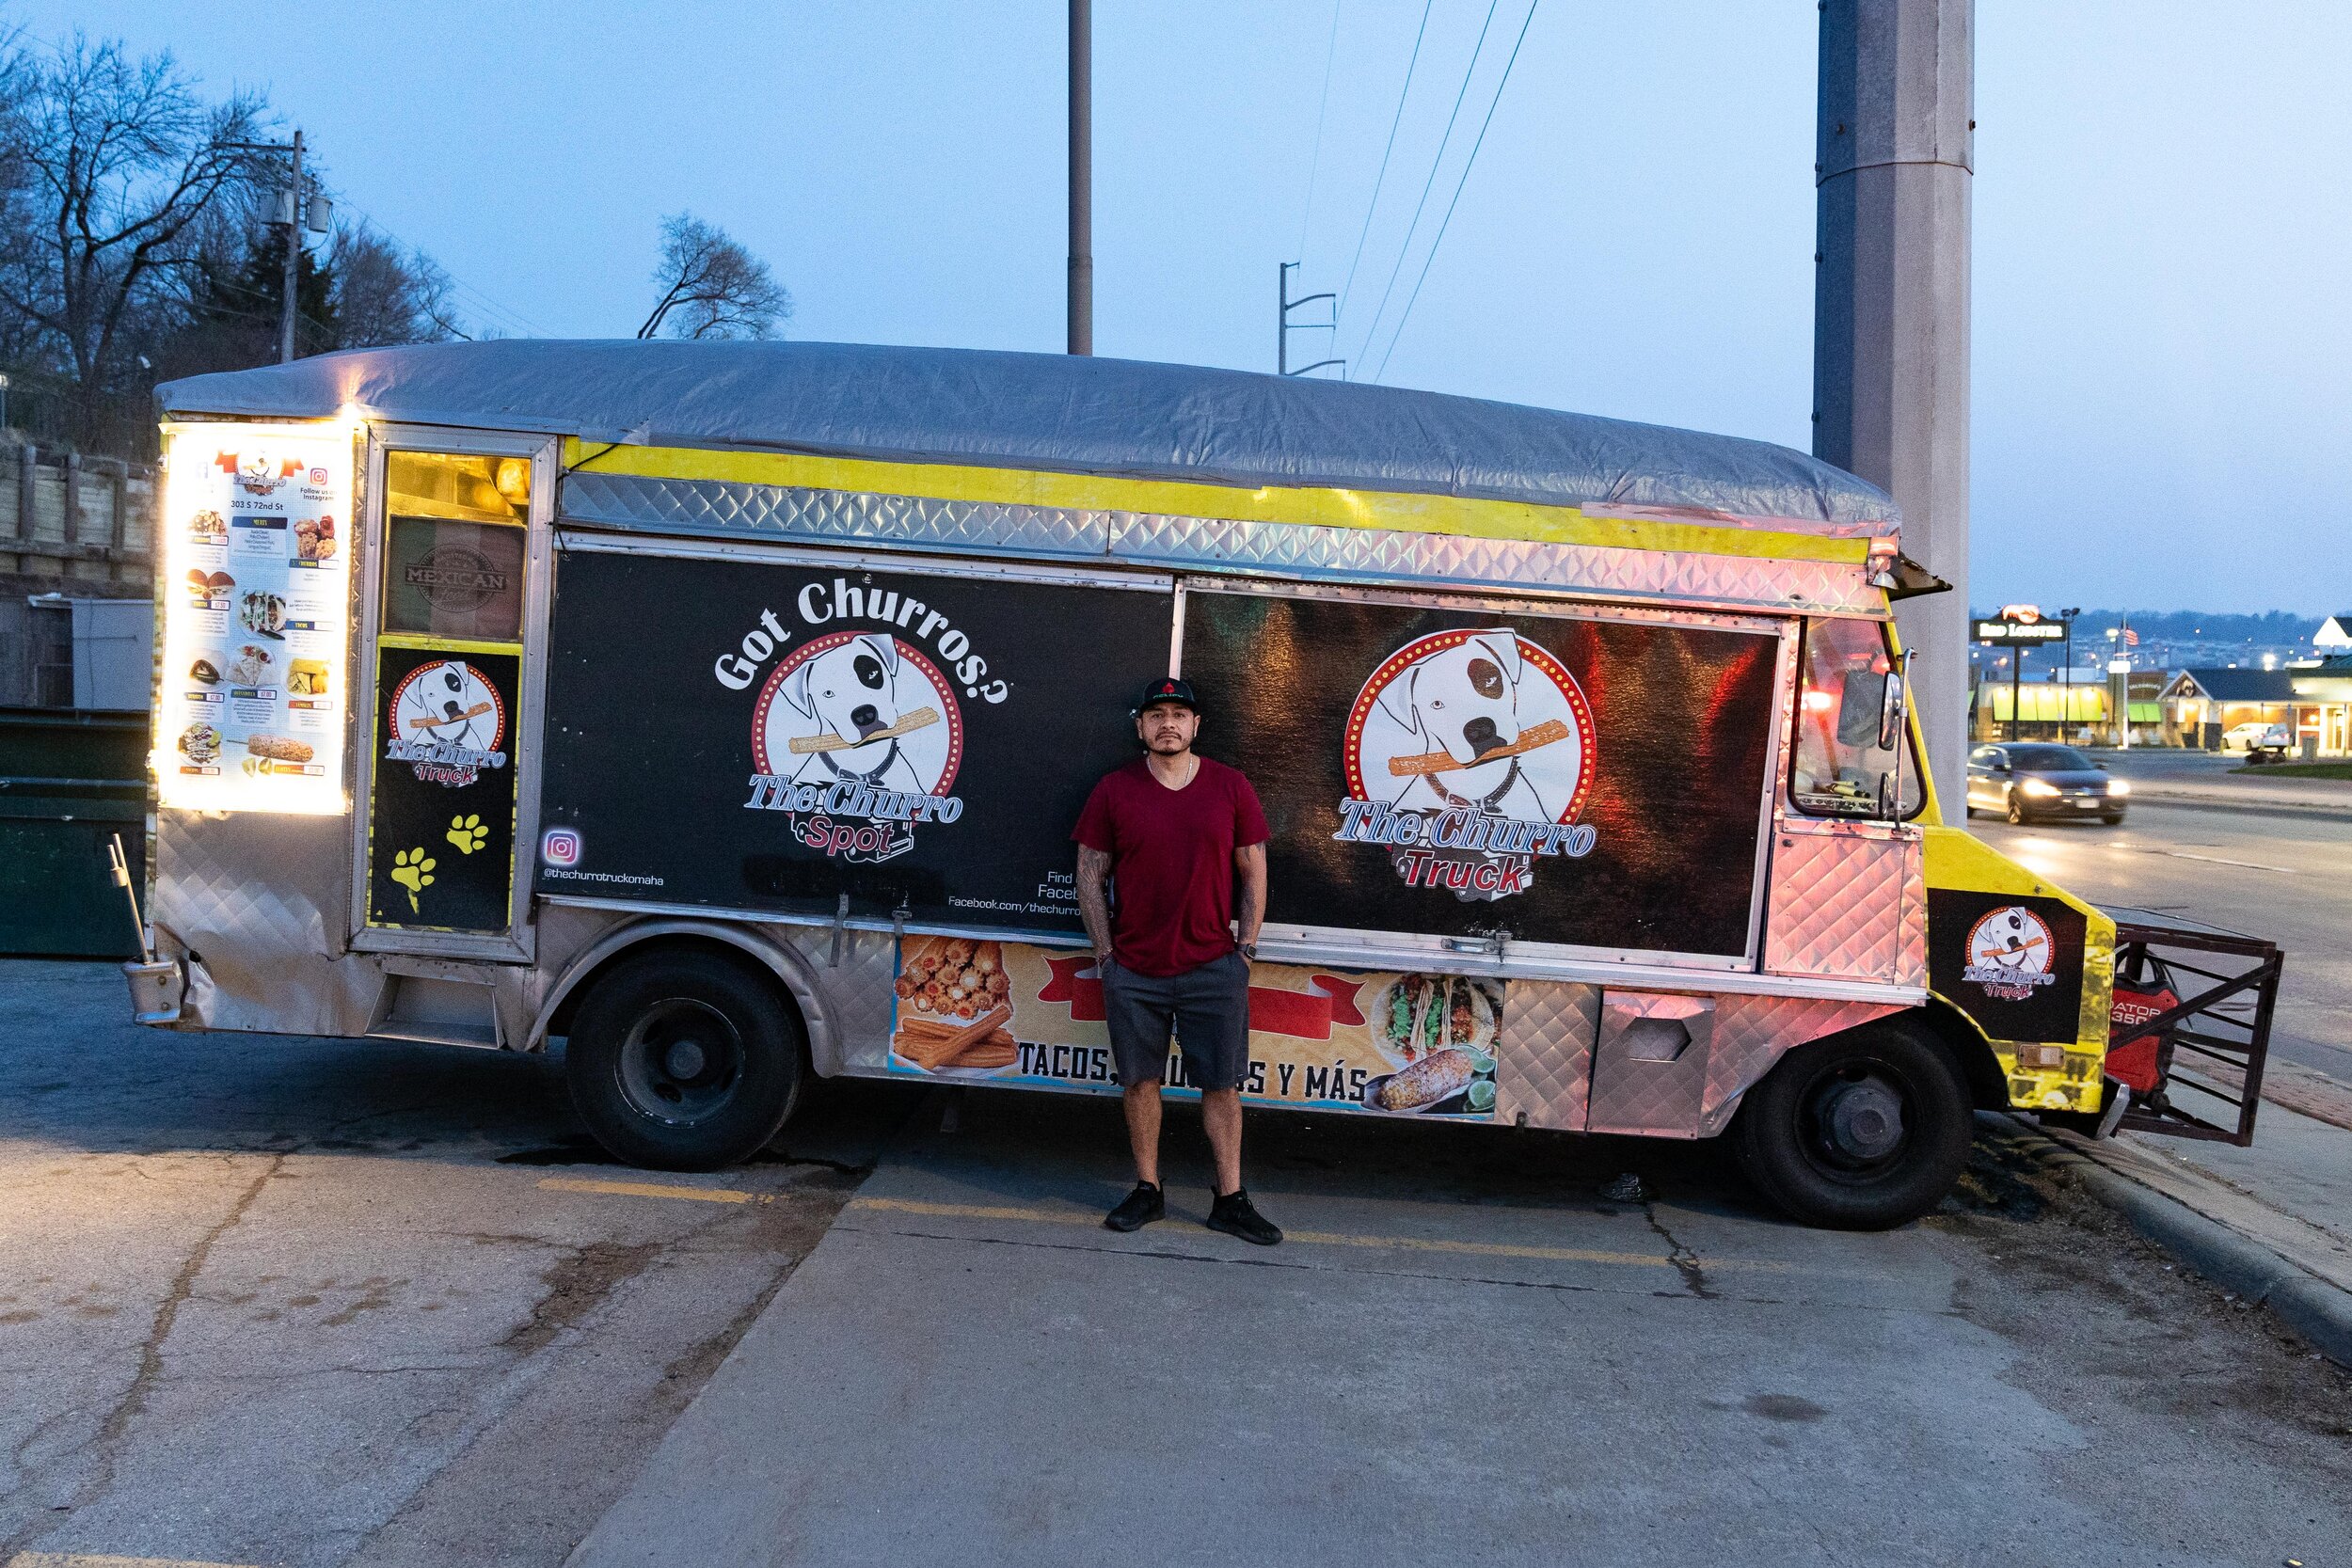  “It’s a team effort. In 2017 we almost won the food truck wars competition, took second place. 2018 we got the award for best food truck in Nebraska. I didn’t even find out until the city told me, I was busy trying to keep up with the work. This is 